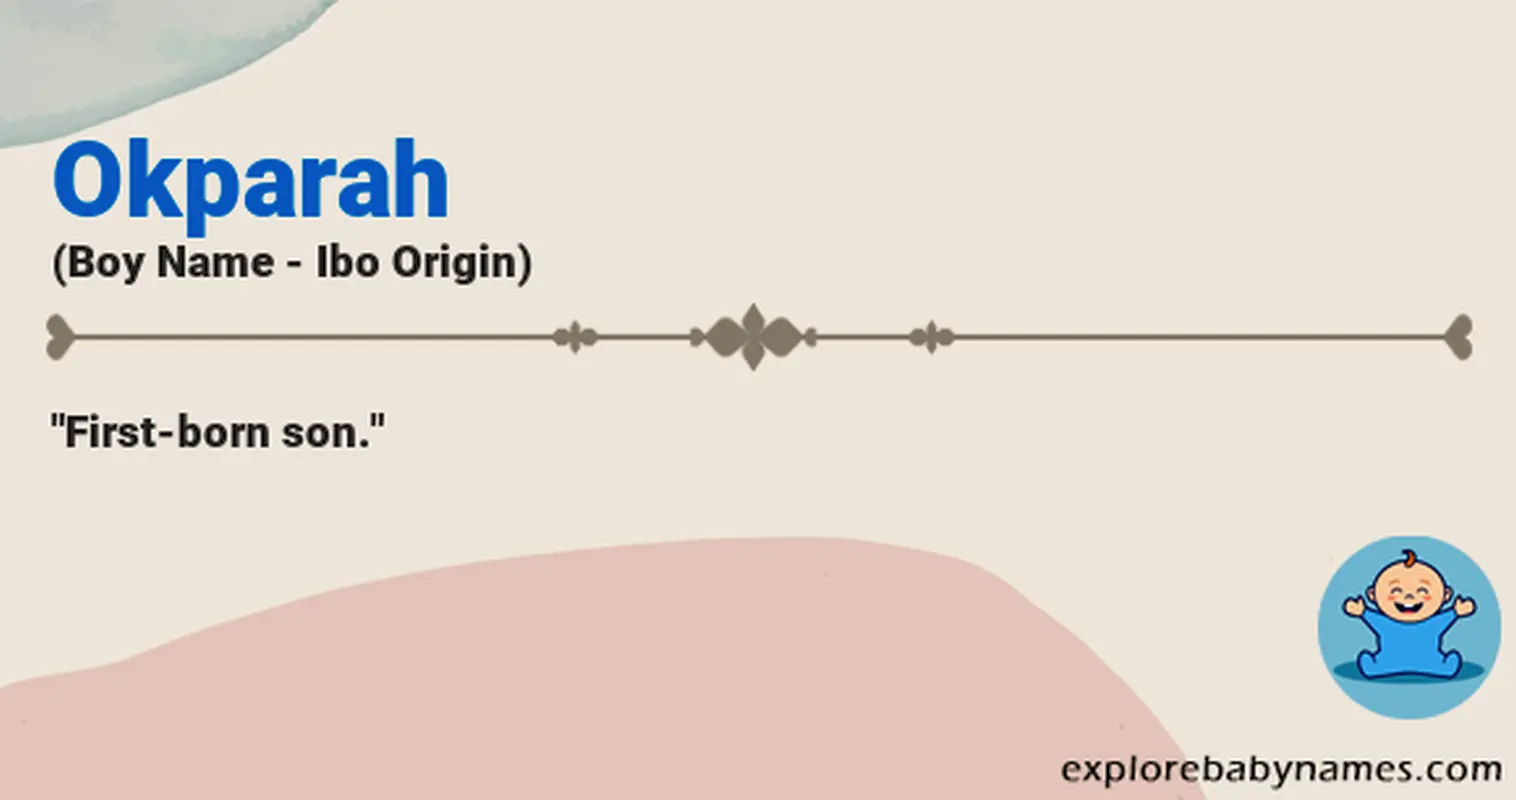 Meaning of Okparah